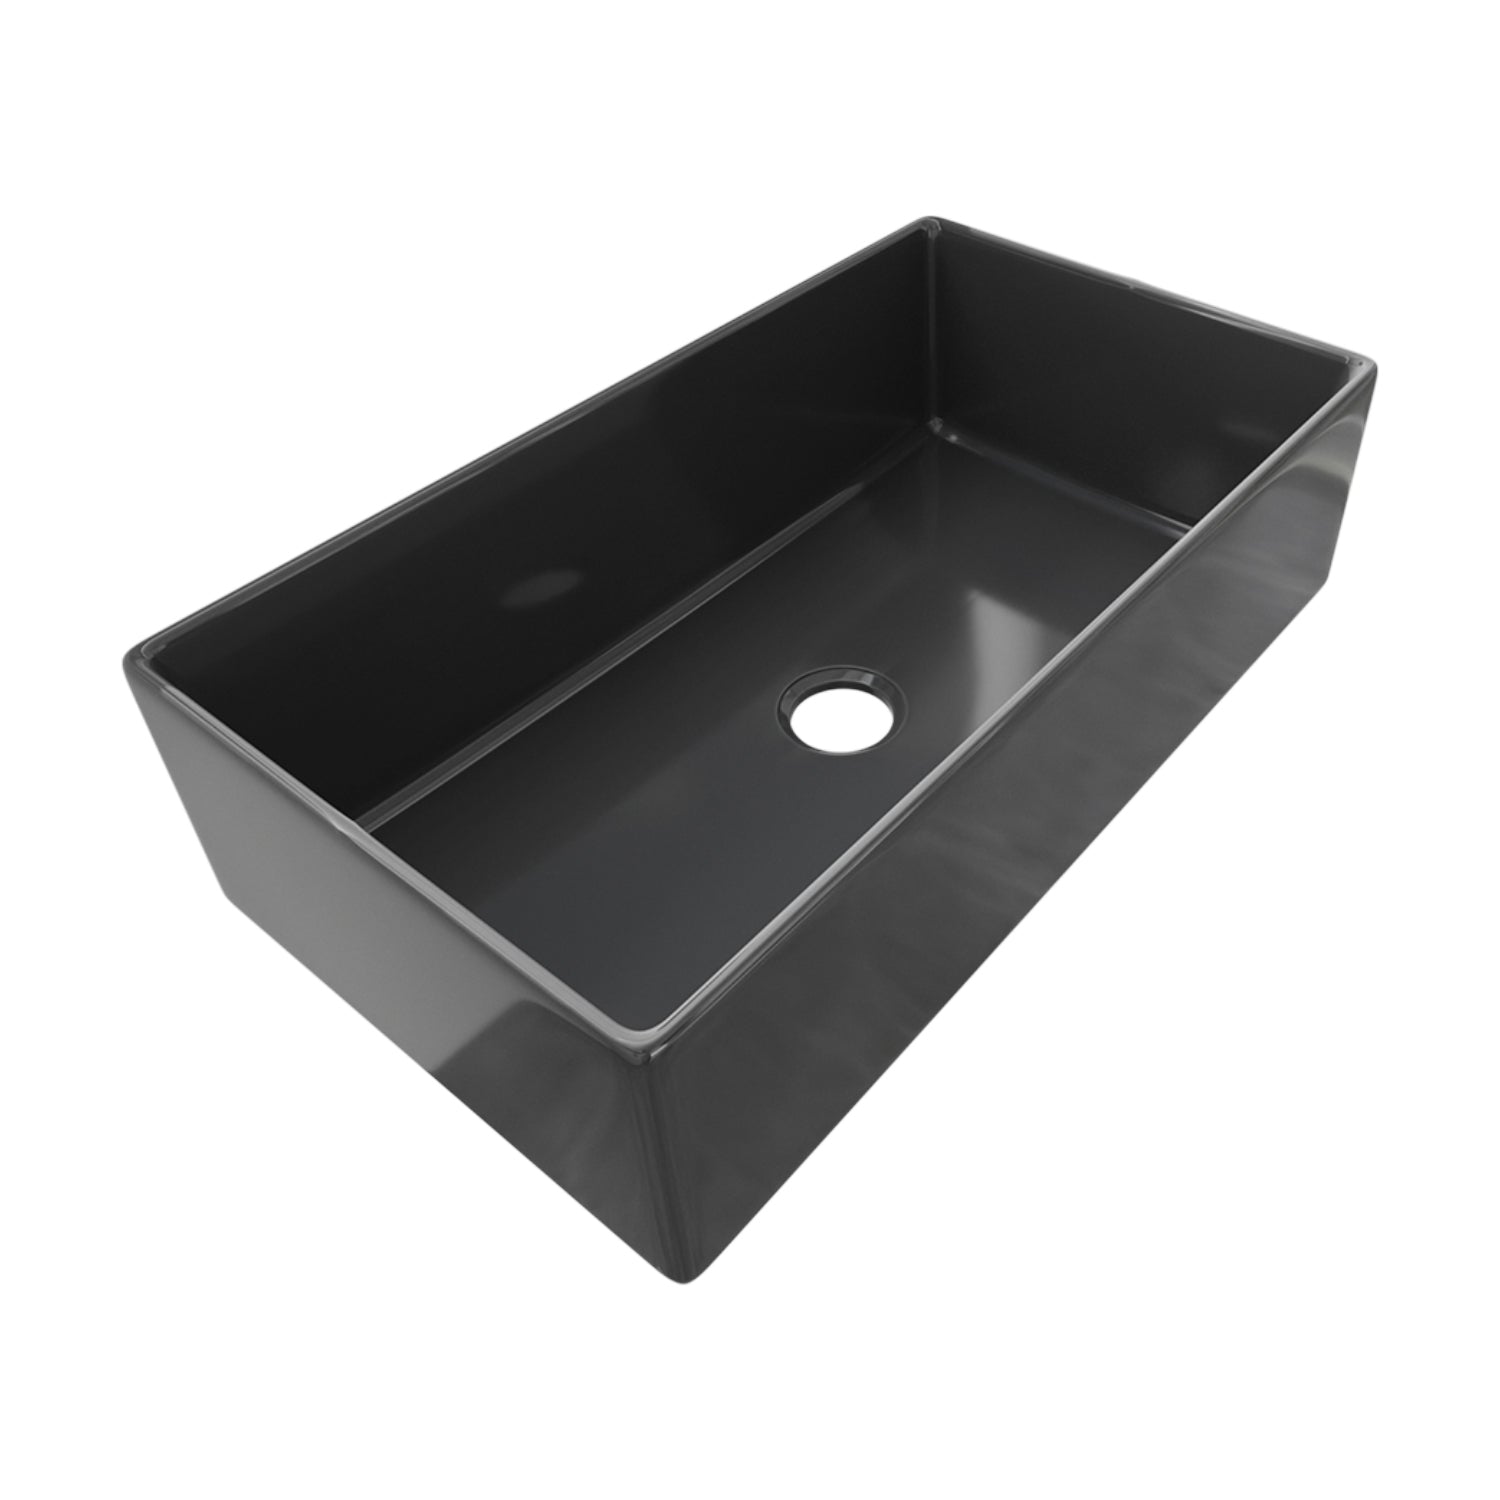 Sinber 36 Inch Farmhouse Apron Single Bowl Kitchen Sink with Fireclay Black Finish 2 Accessories F3620S-B-OL